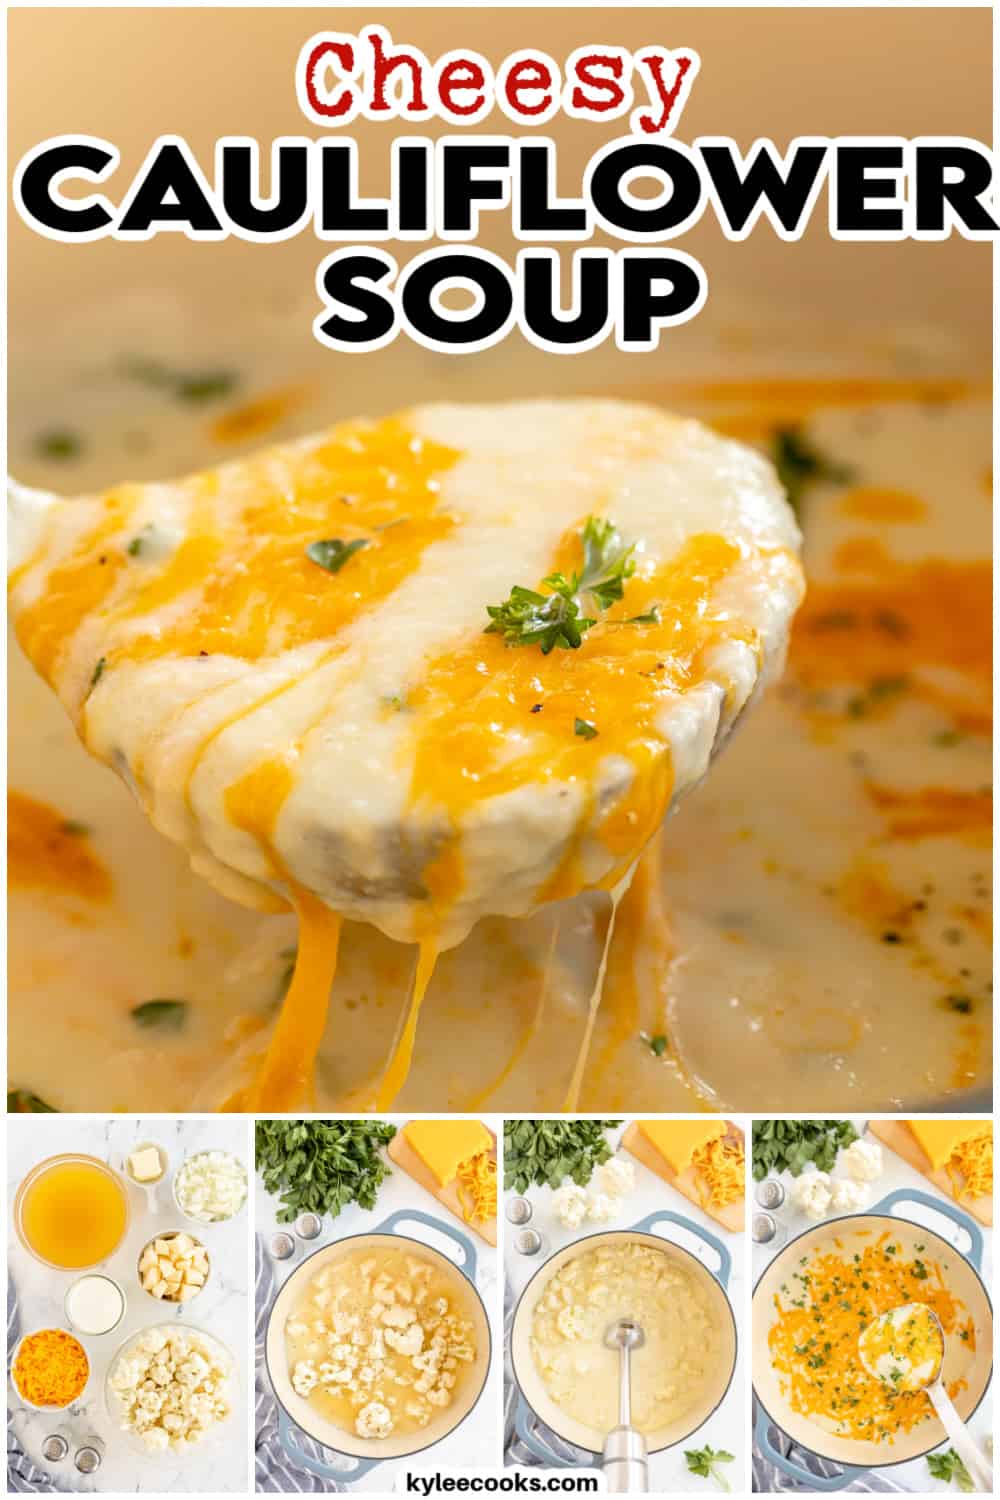 cauliflower cheese soup with recipe name overlaid in text.